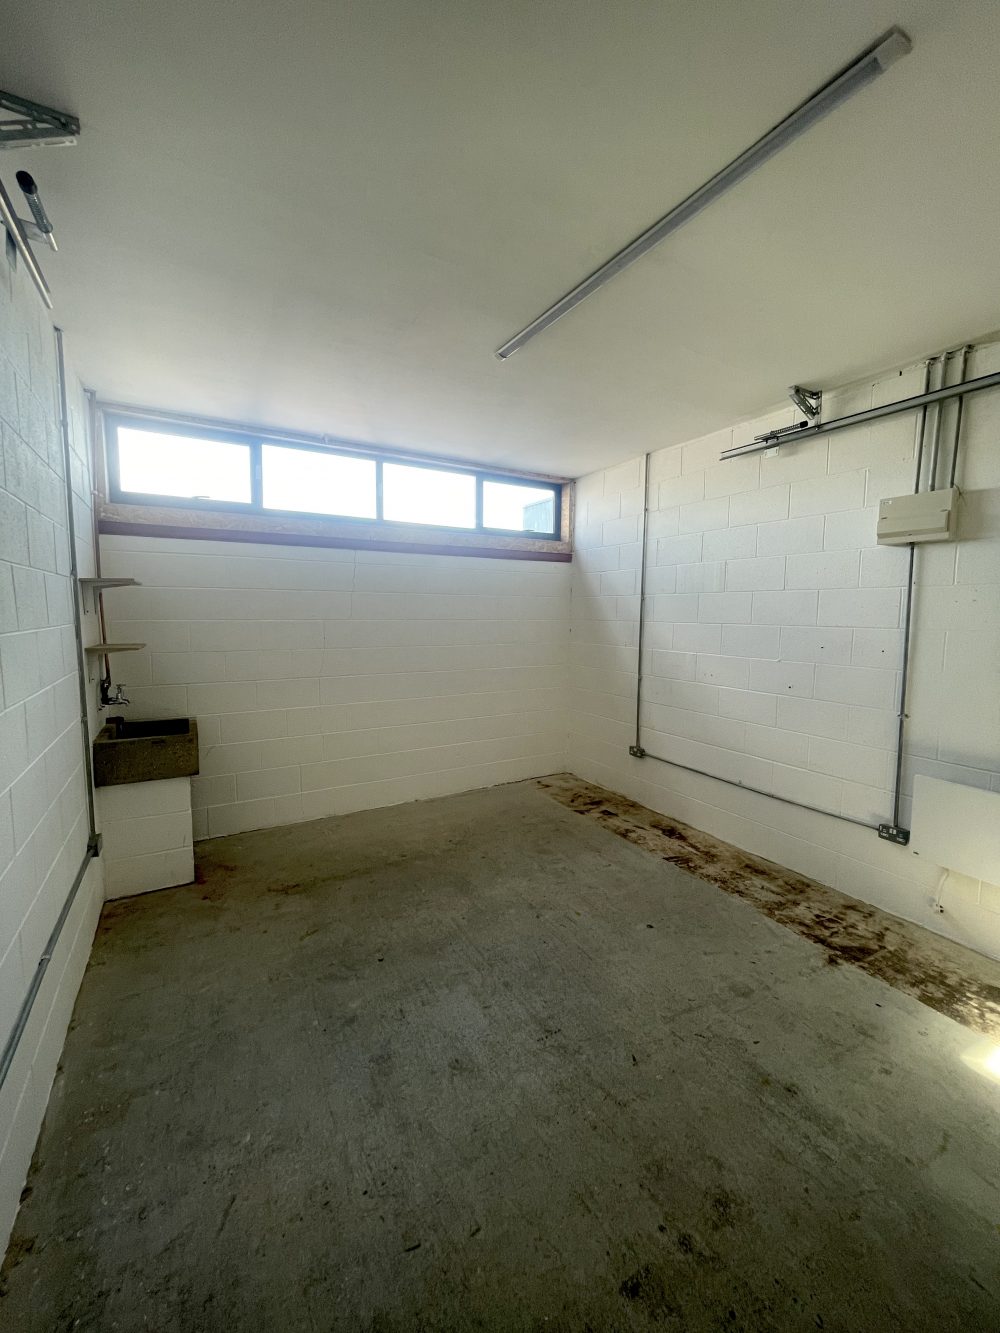 N4 Manor House Eade Road 1st Floor Unit To rent in Creative Warehouse Hub North London143